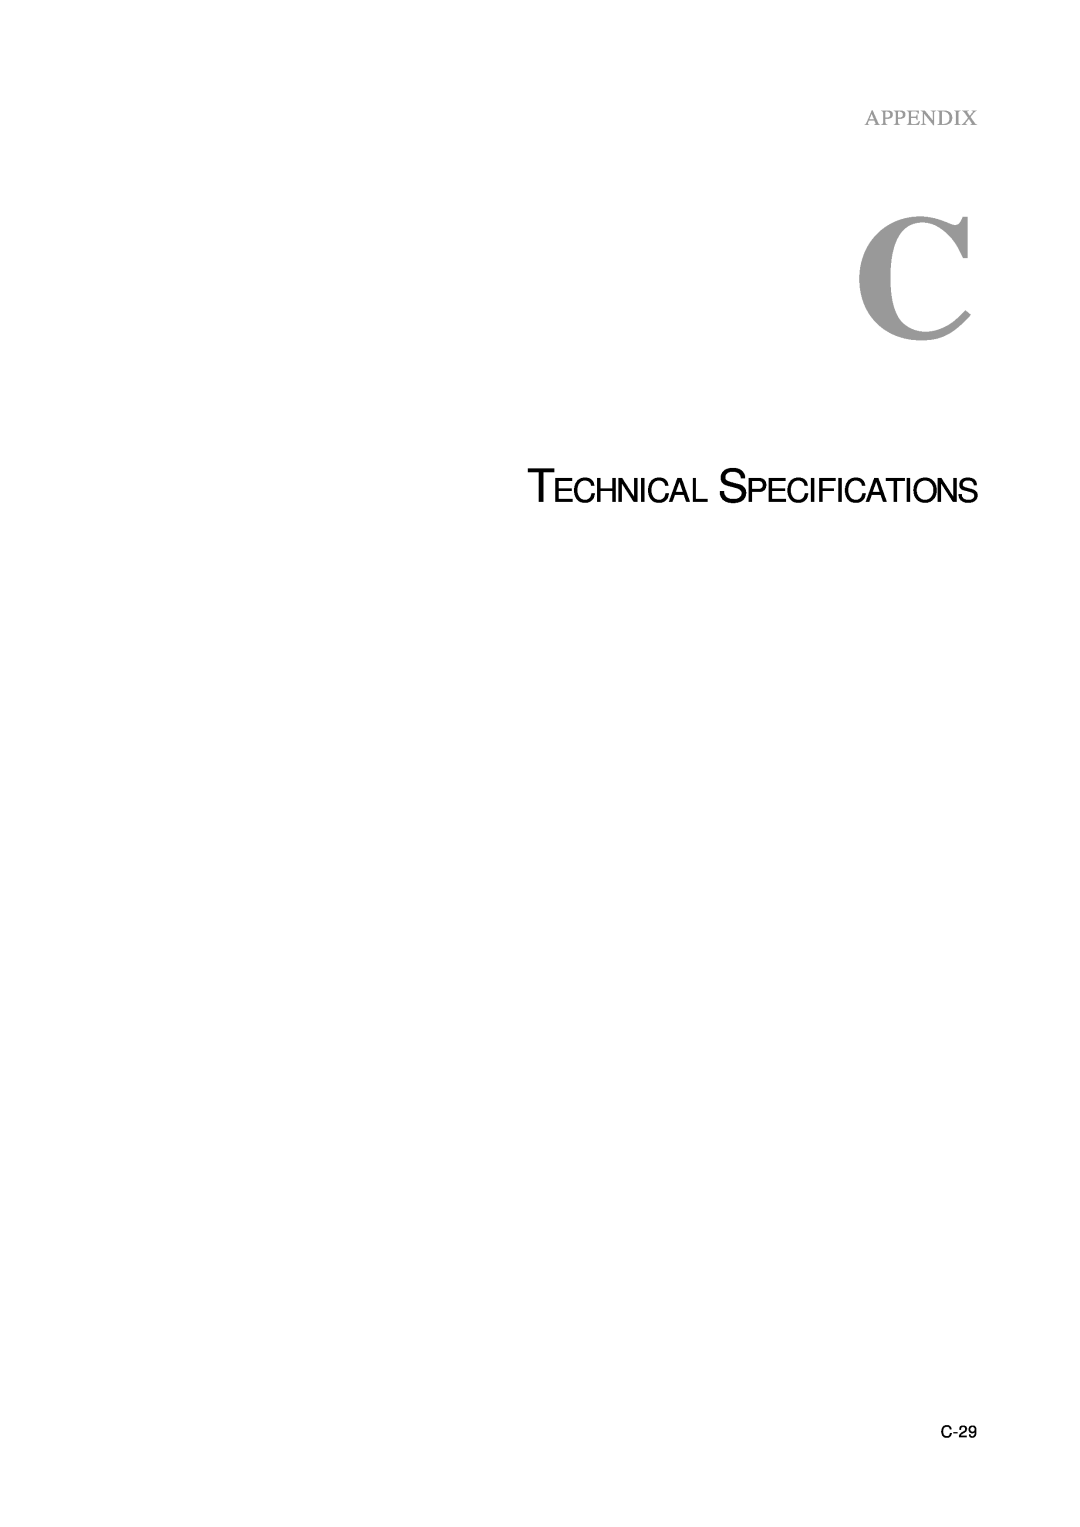 Elo TouchSystems 1000 Series manual Technical Specifications, Appendix, C-29 